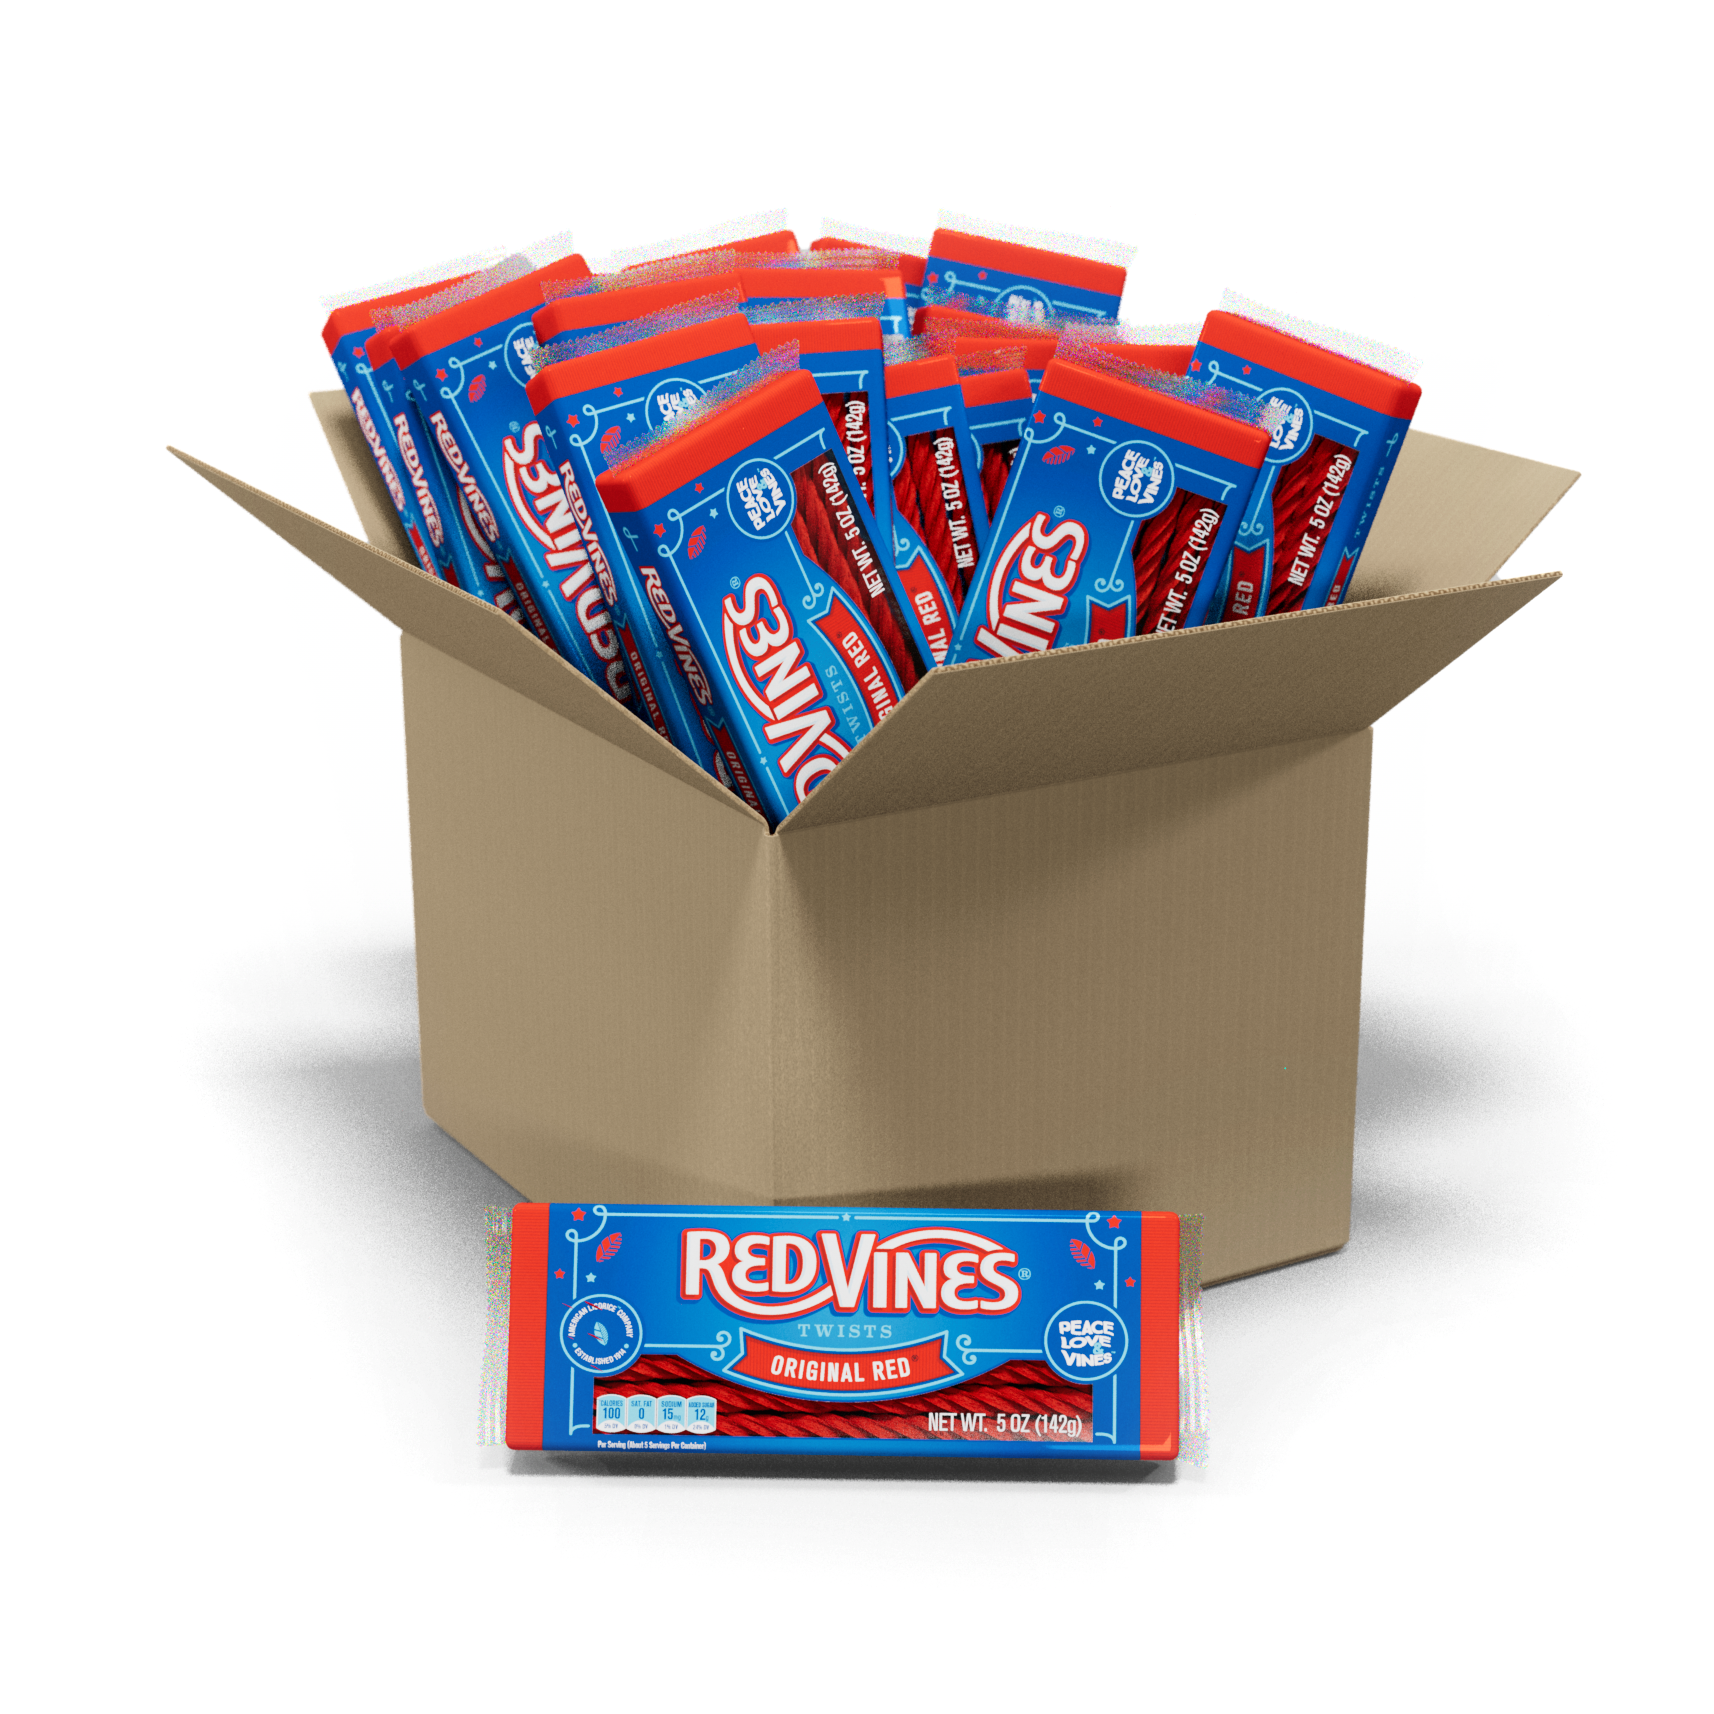 Red Vines Original Red® Chewy Licorice Twists 5 oz